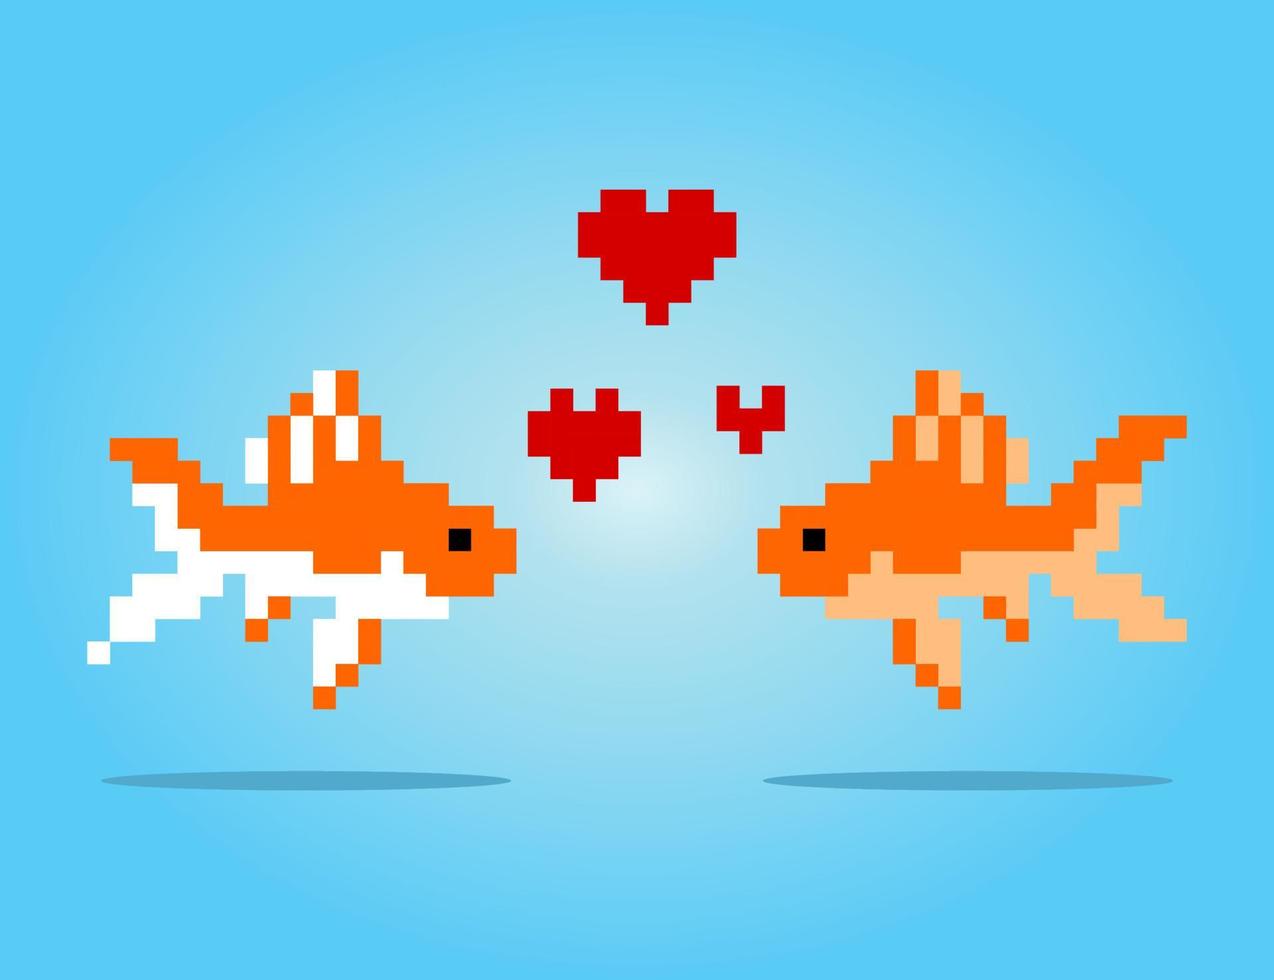 8 bit pixel golden fish. Animal for game assets and cross stitch patterns in vector illustrations.